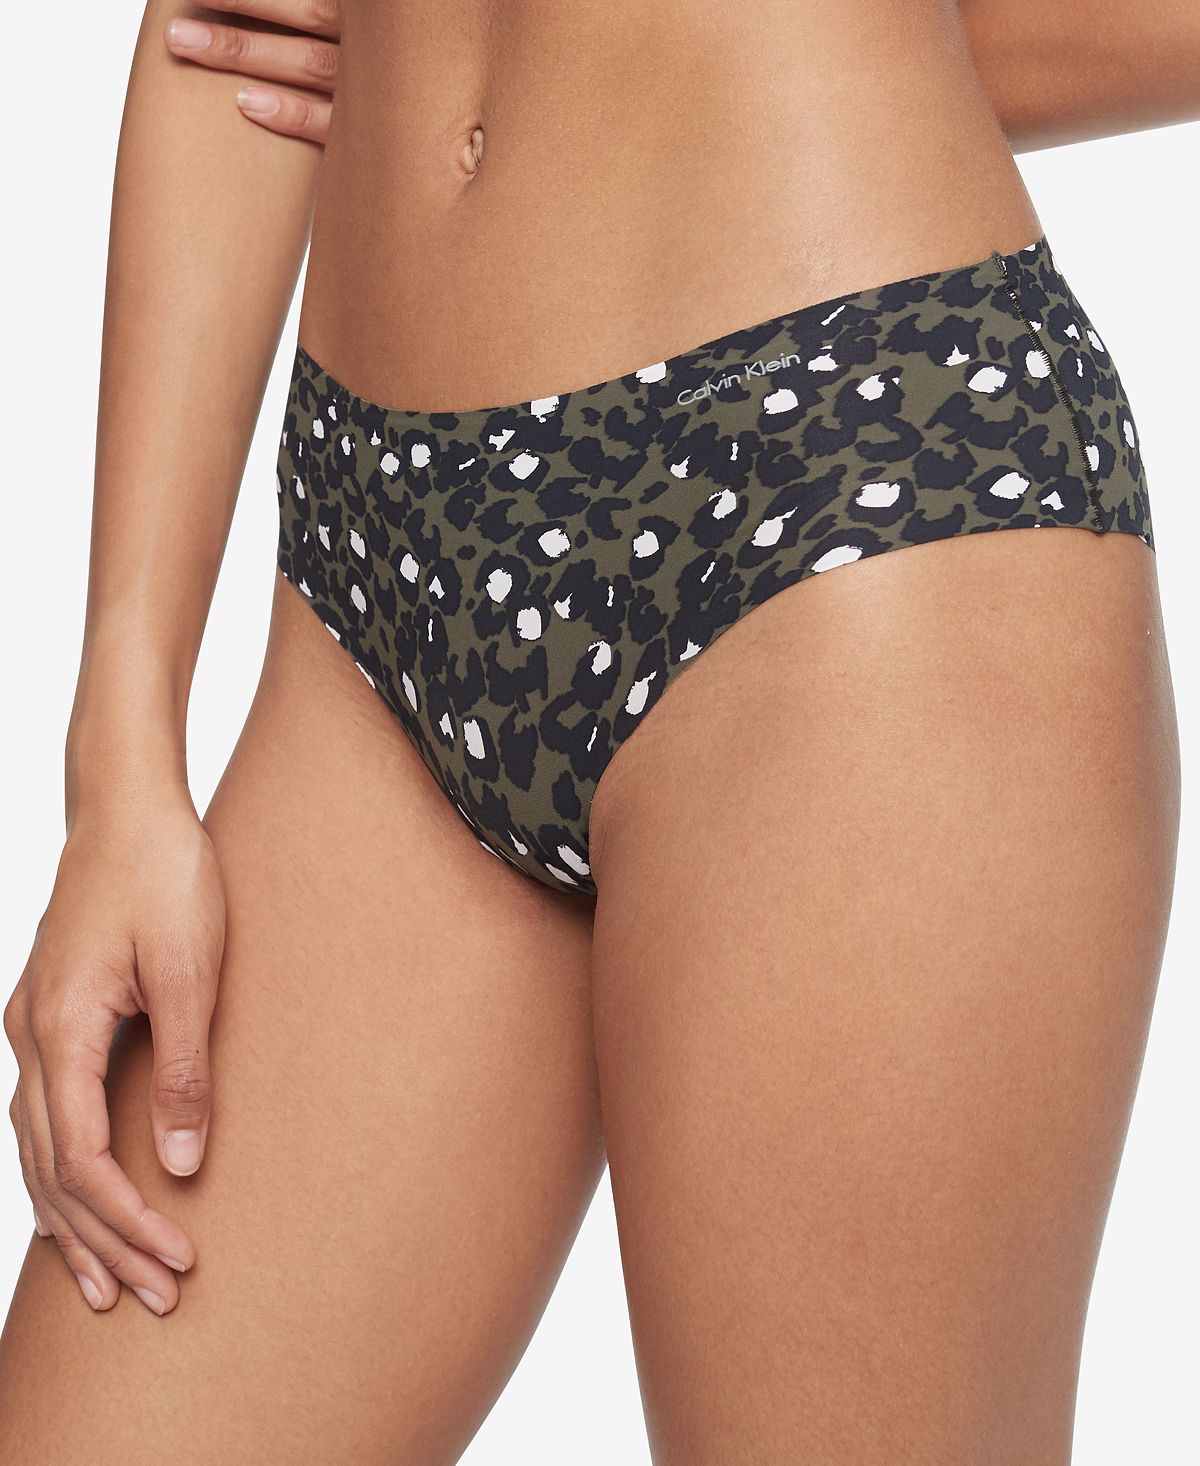 Calvin Klein Invisibles Hipster Panty Style D3429